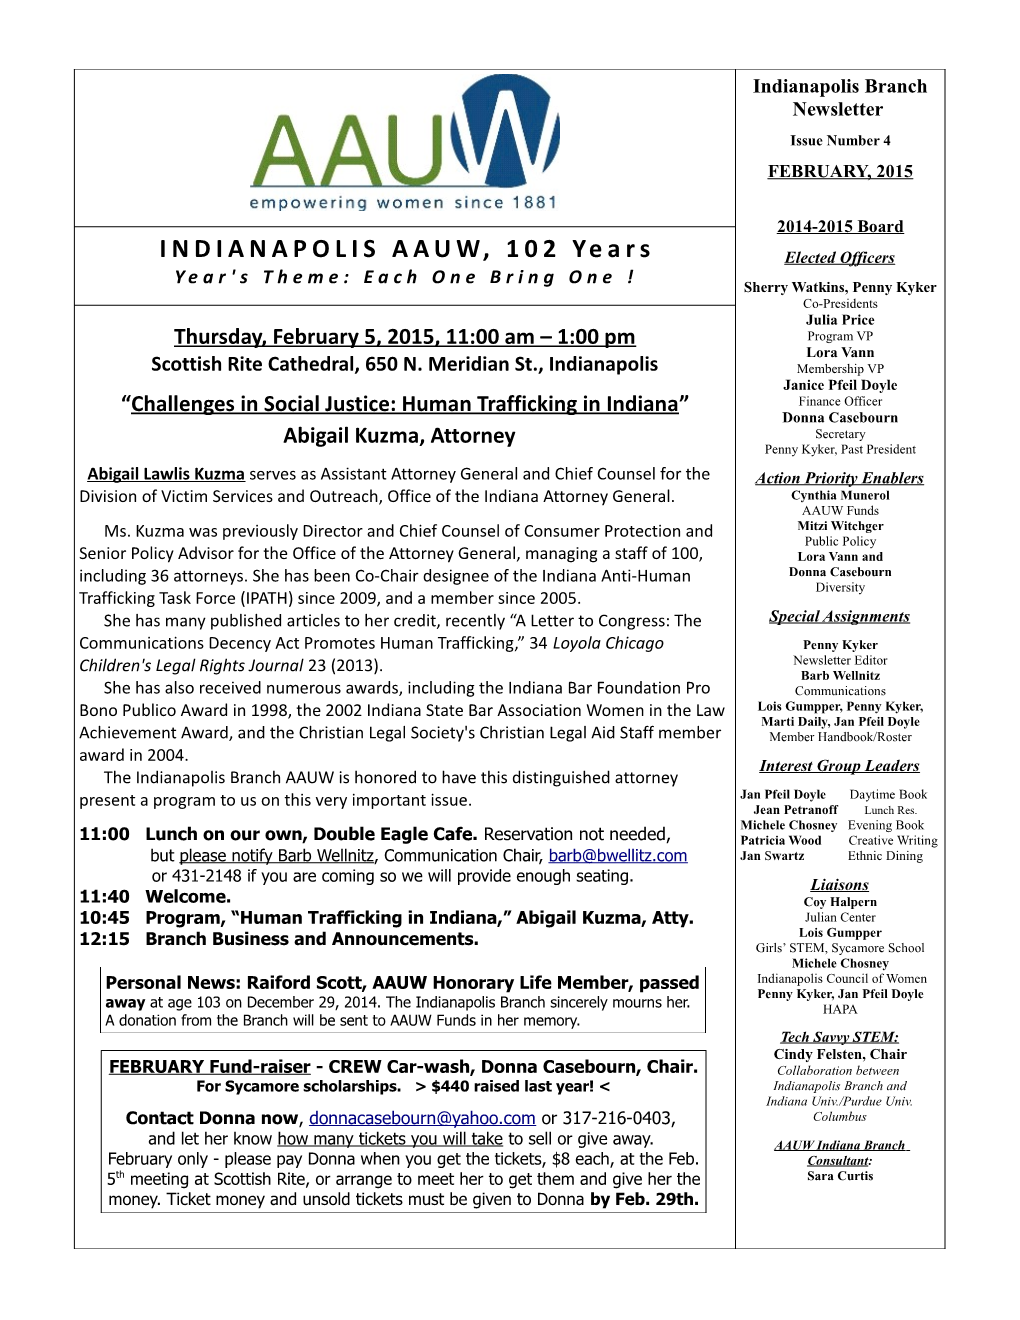 INDIANAPOLIS AAUW, 102 Years